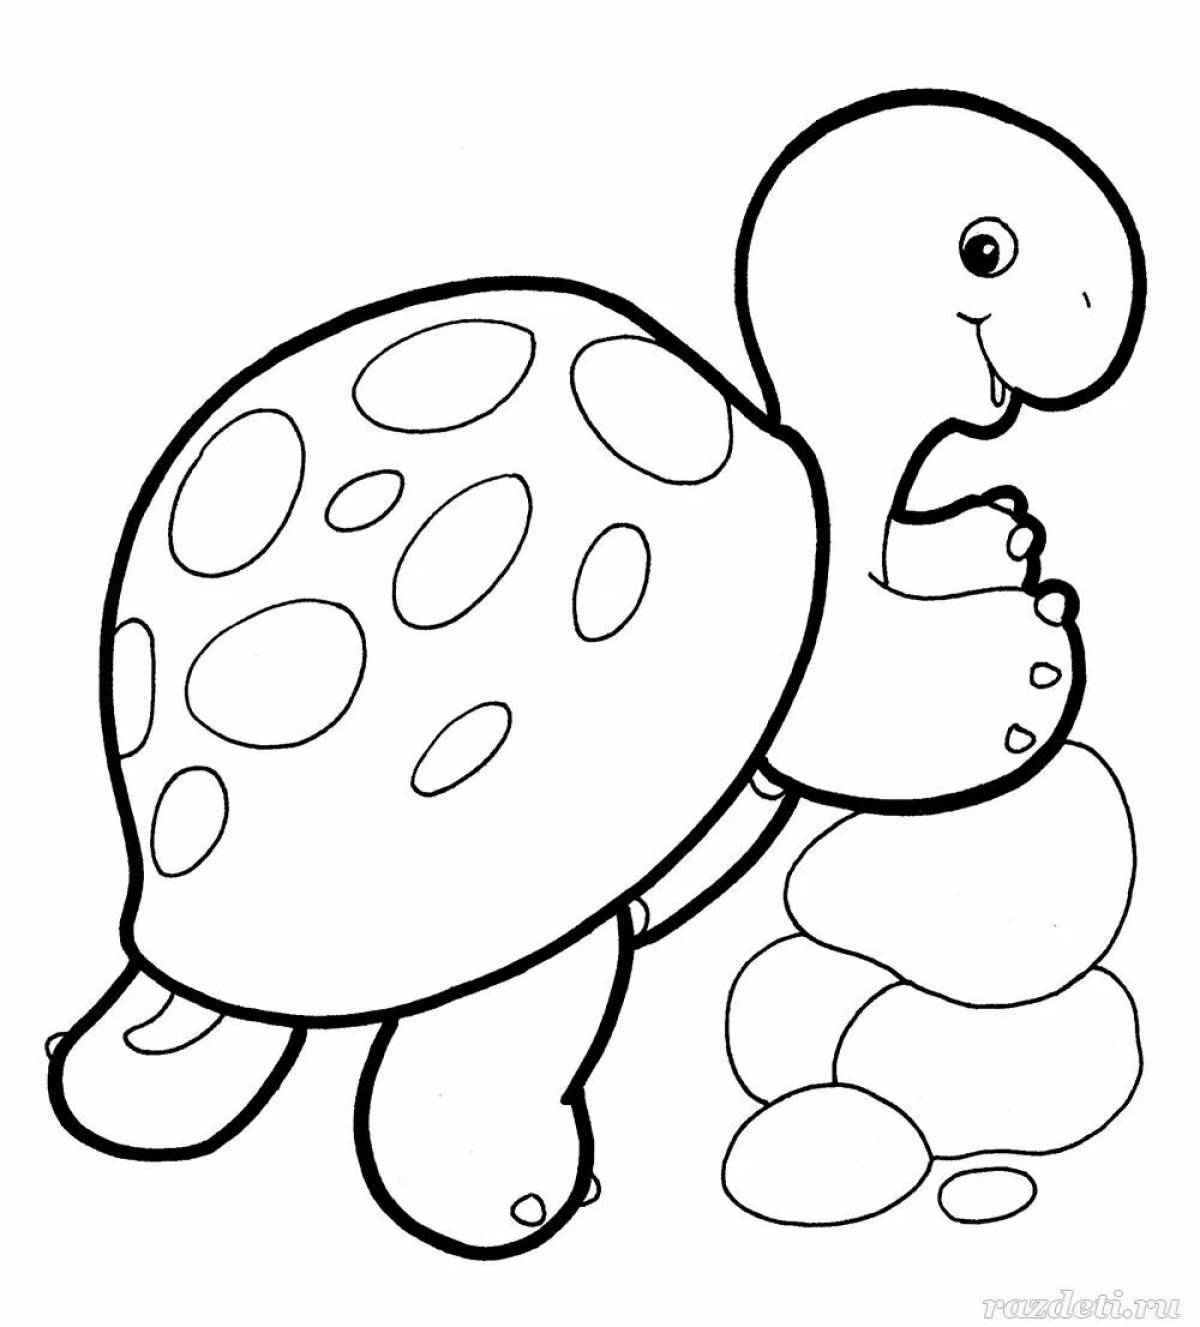 Fancy turtle coloring book for 3-4 year olds